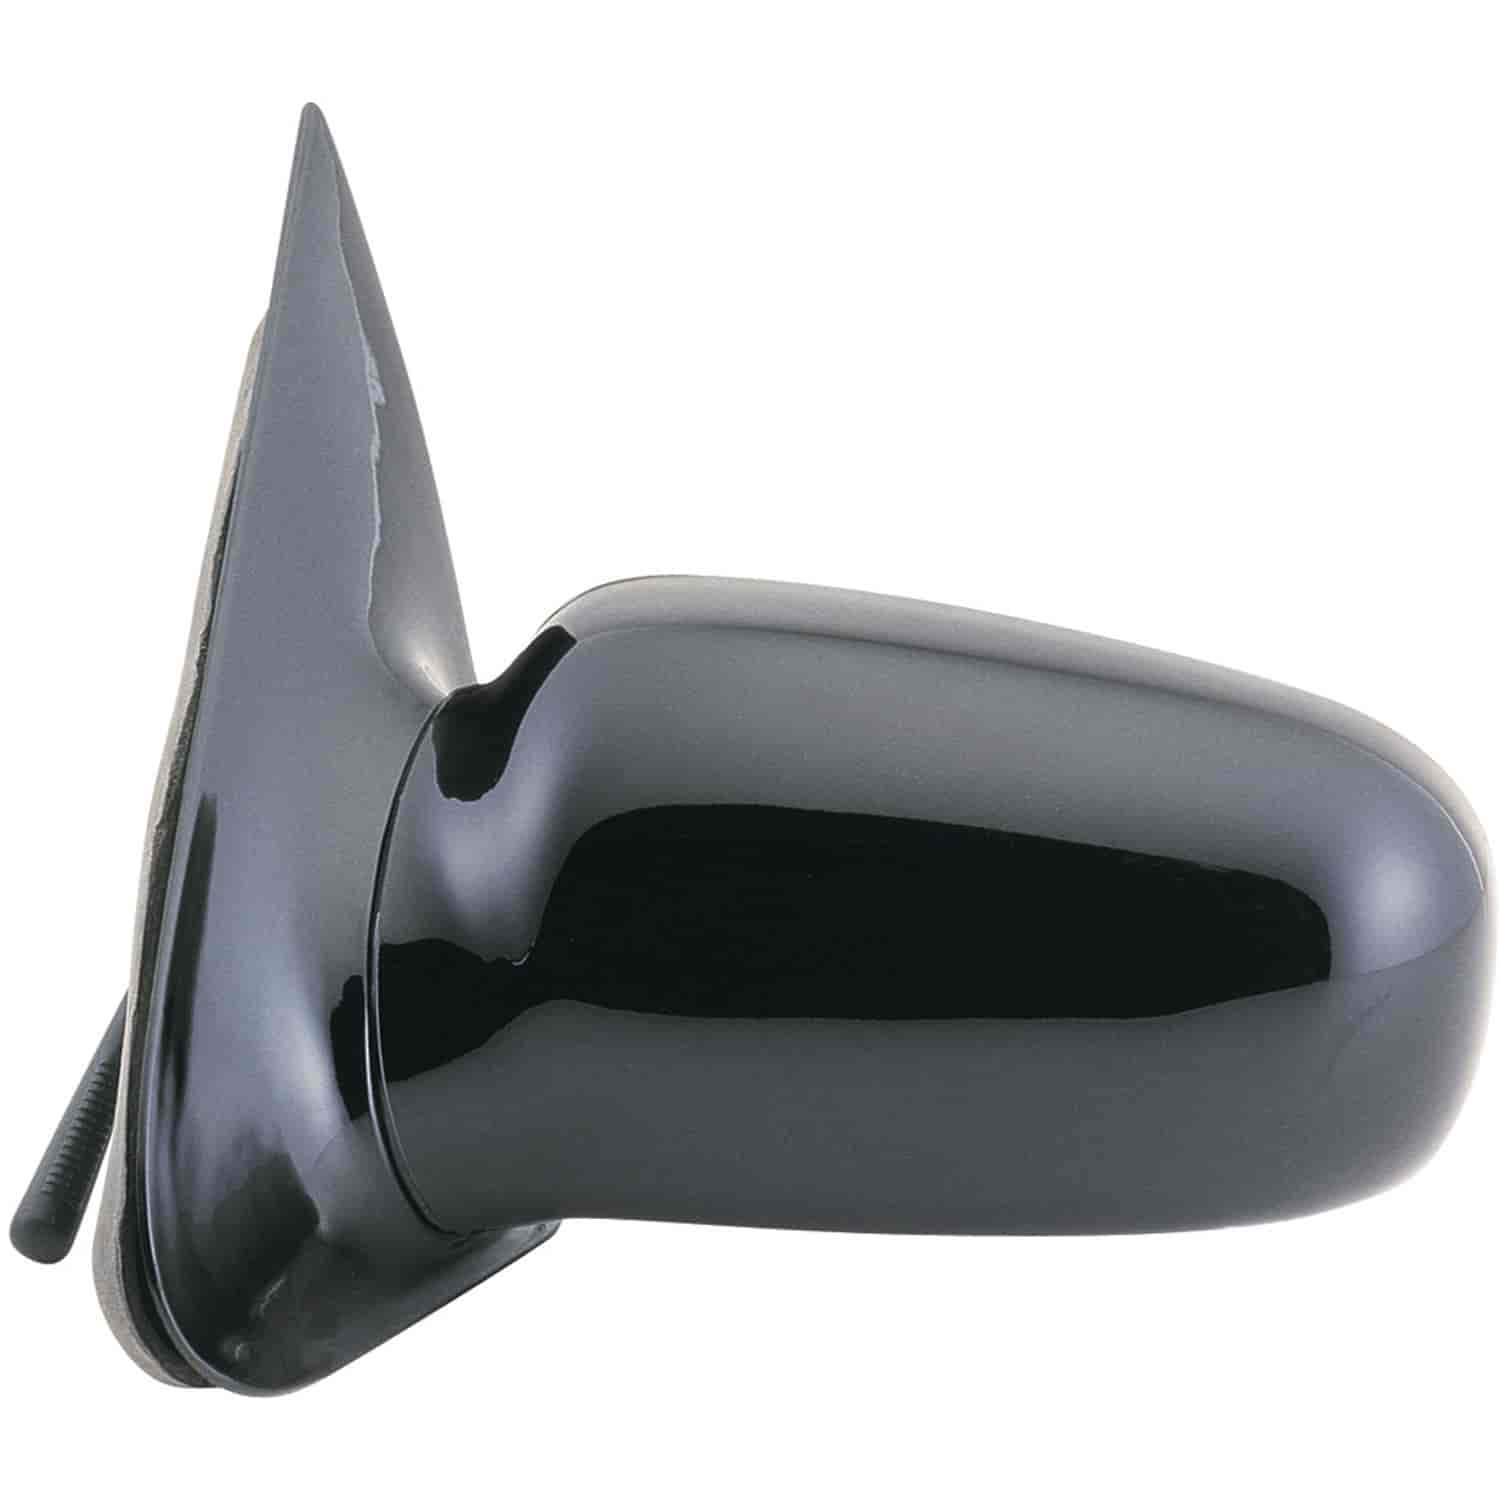 OEM Style Replacement mirror for 95-05 Chevy Cavalier Coupe Pontiac Sunfire Coupe driver side mirror